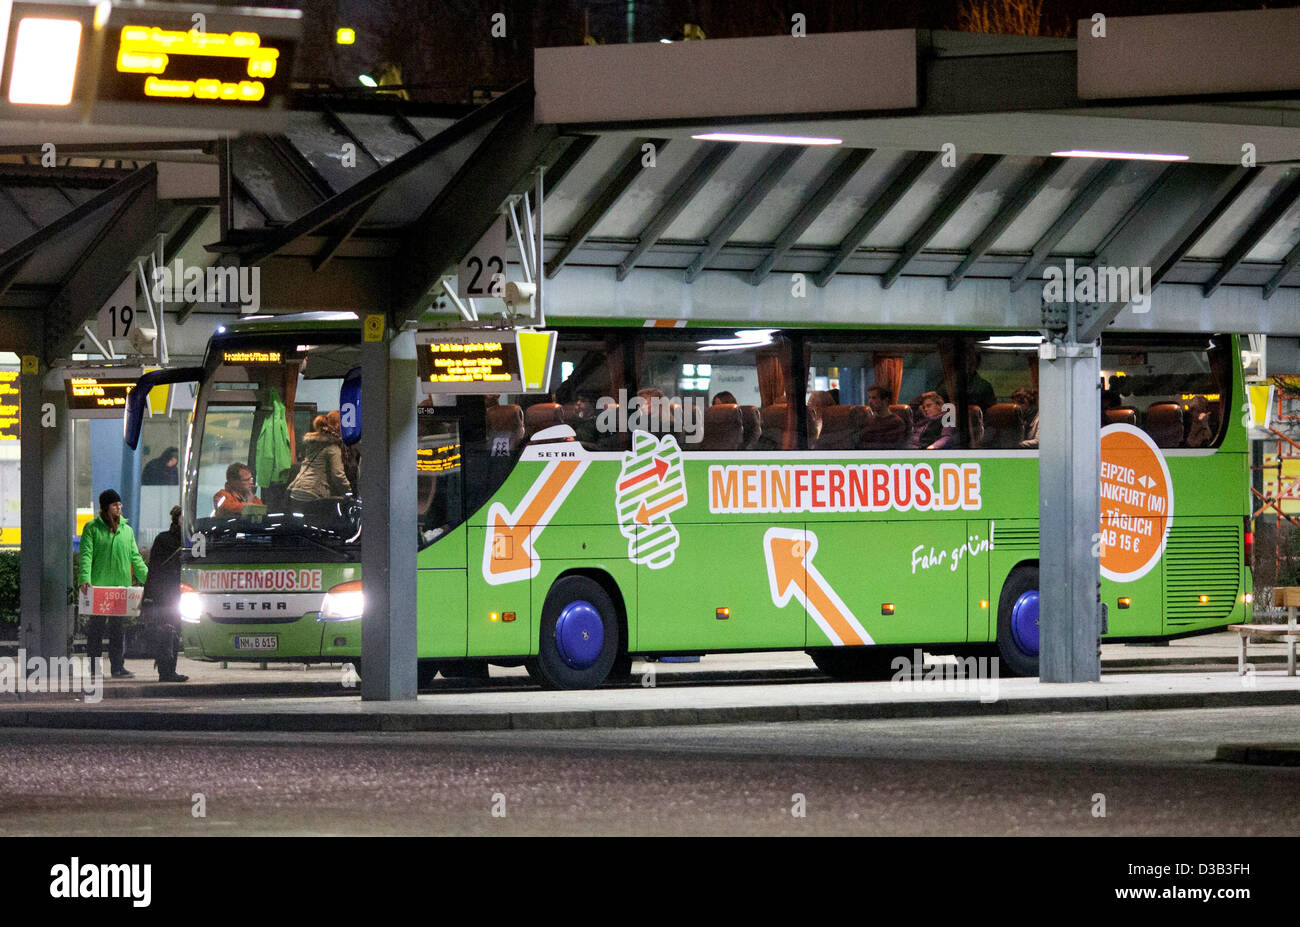 A 'Meinfernbus' long distance bus stands at the central bus station in  Berlin, Germany, 14 February 2013. The bus line introduces a new route from  Berlin via Leipzig to Frankfurt/Main. Photo: Florian